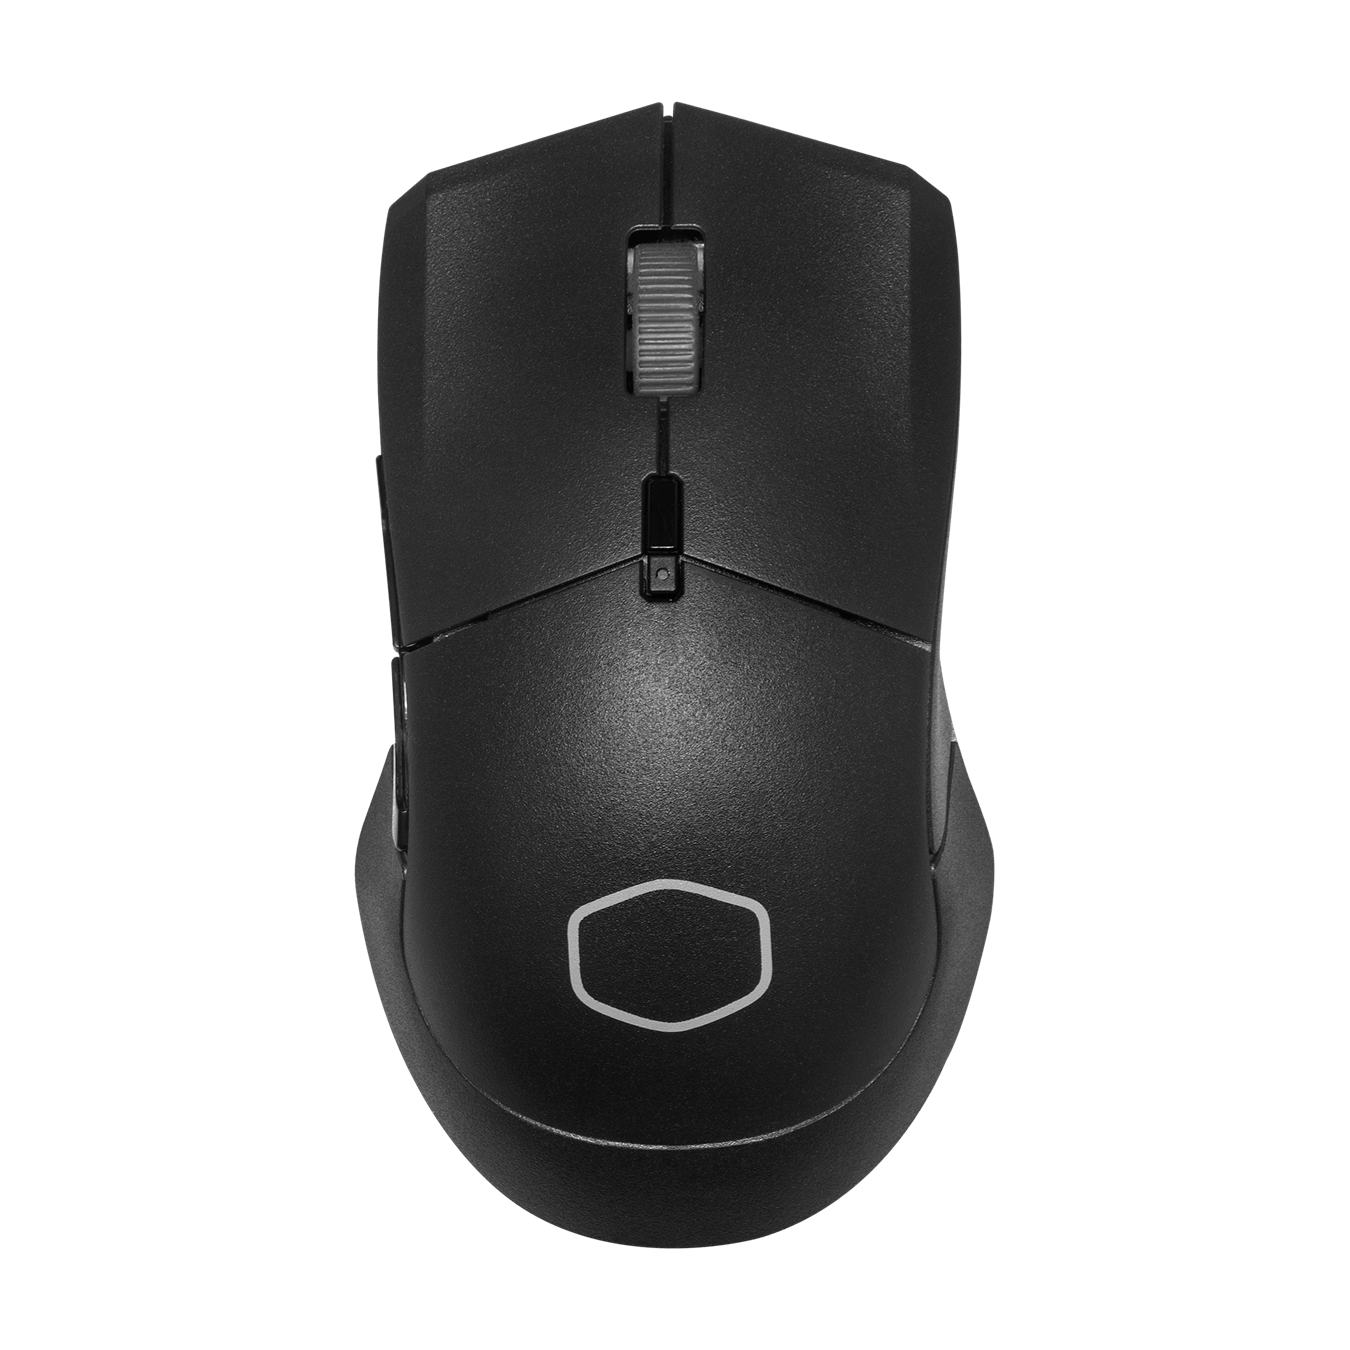 MM311 Wireless Mouse - Optimized for right-handers with two side buttons and lightweight design without exterior holes that compromise on aesthetics, weighs in at 77g even with a AA battery included